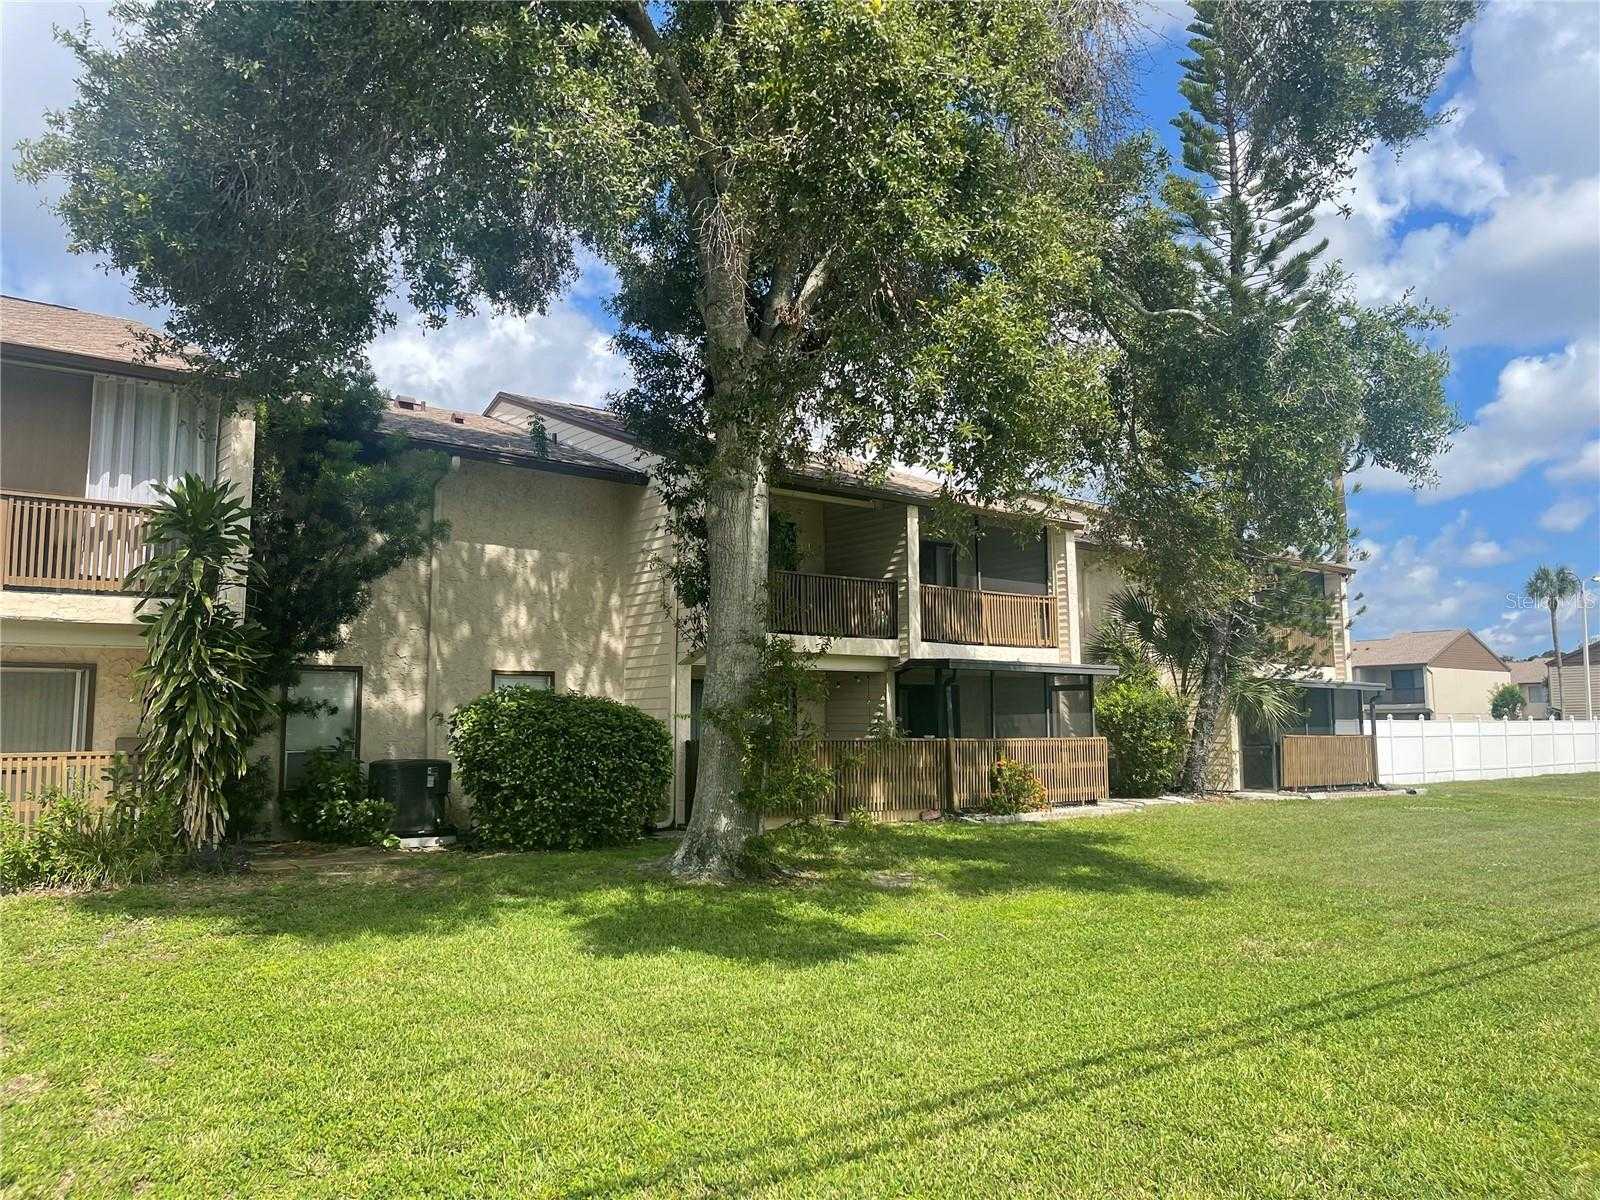 $289,000 - 3Br/3Ba -  for Sale in Barkwood Square Condo, St Petersburg